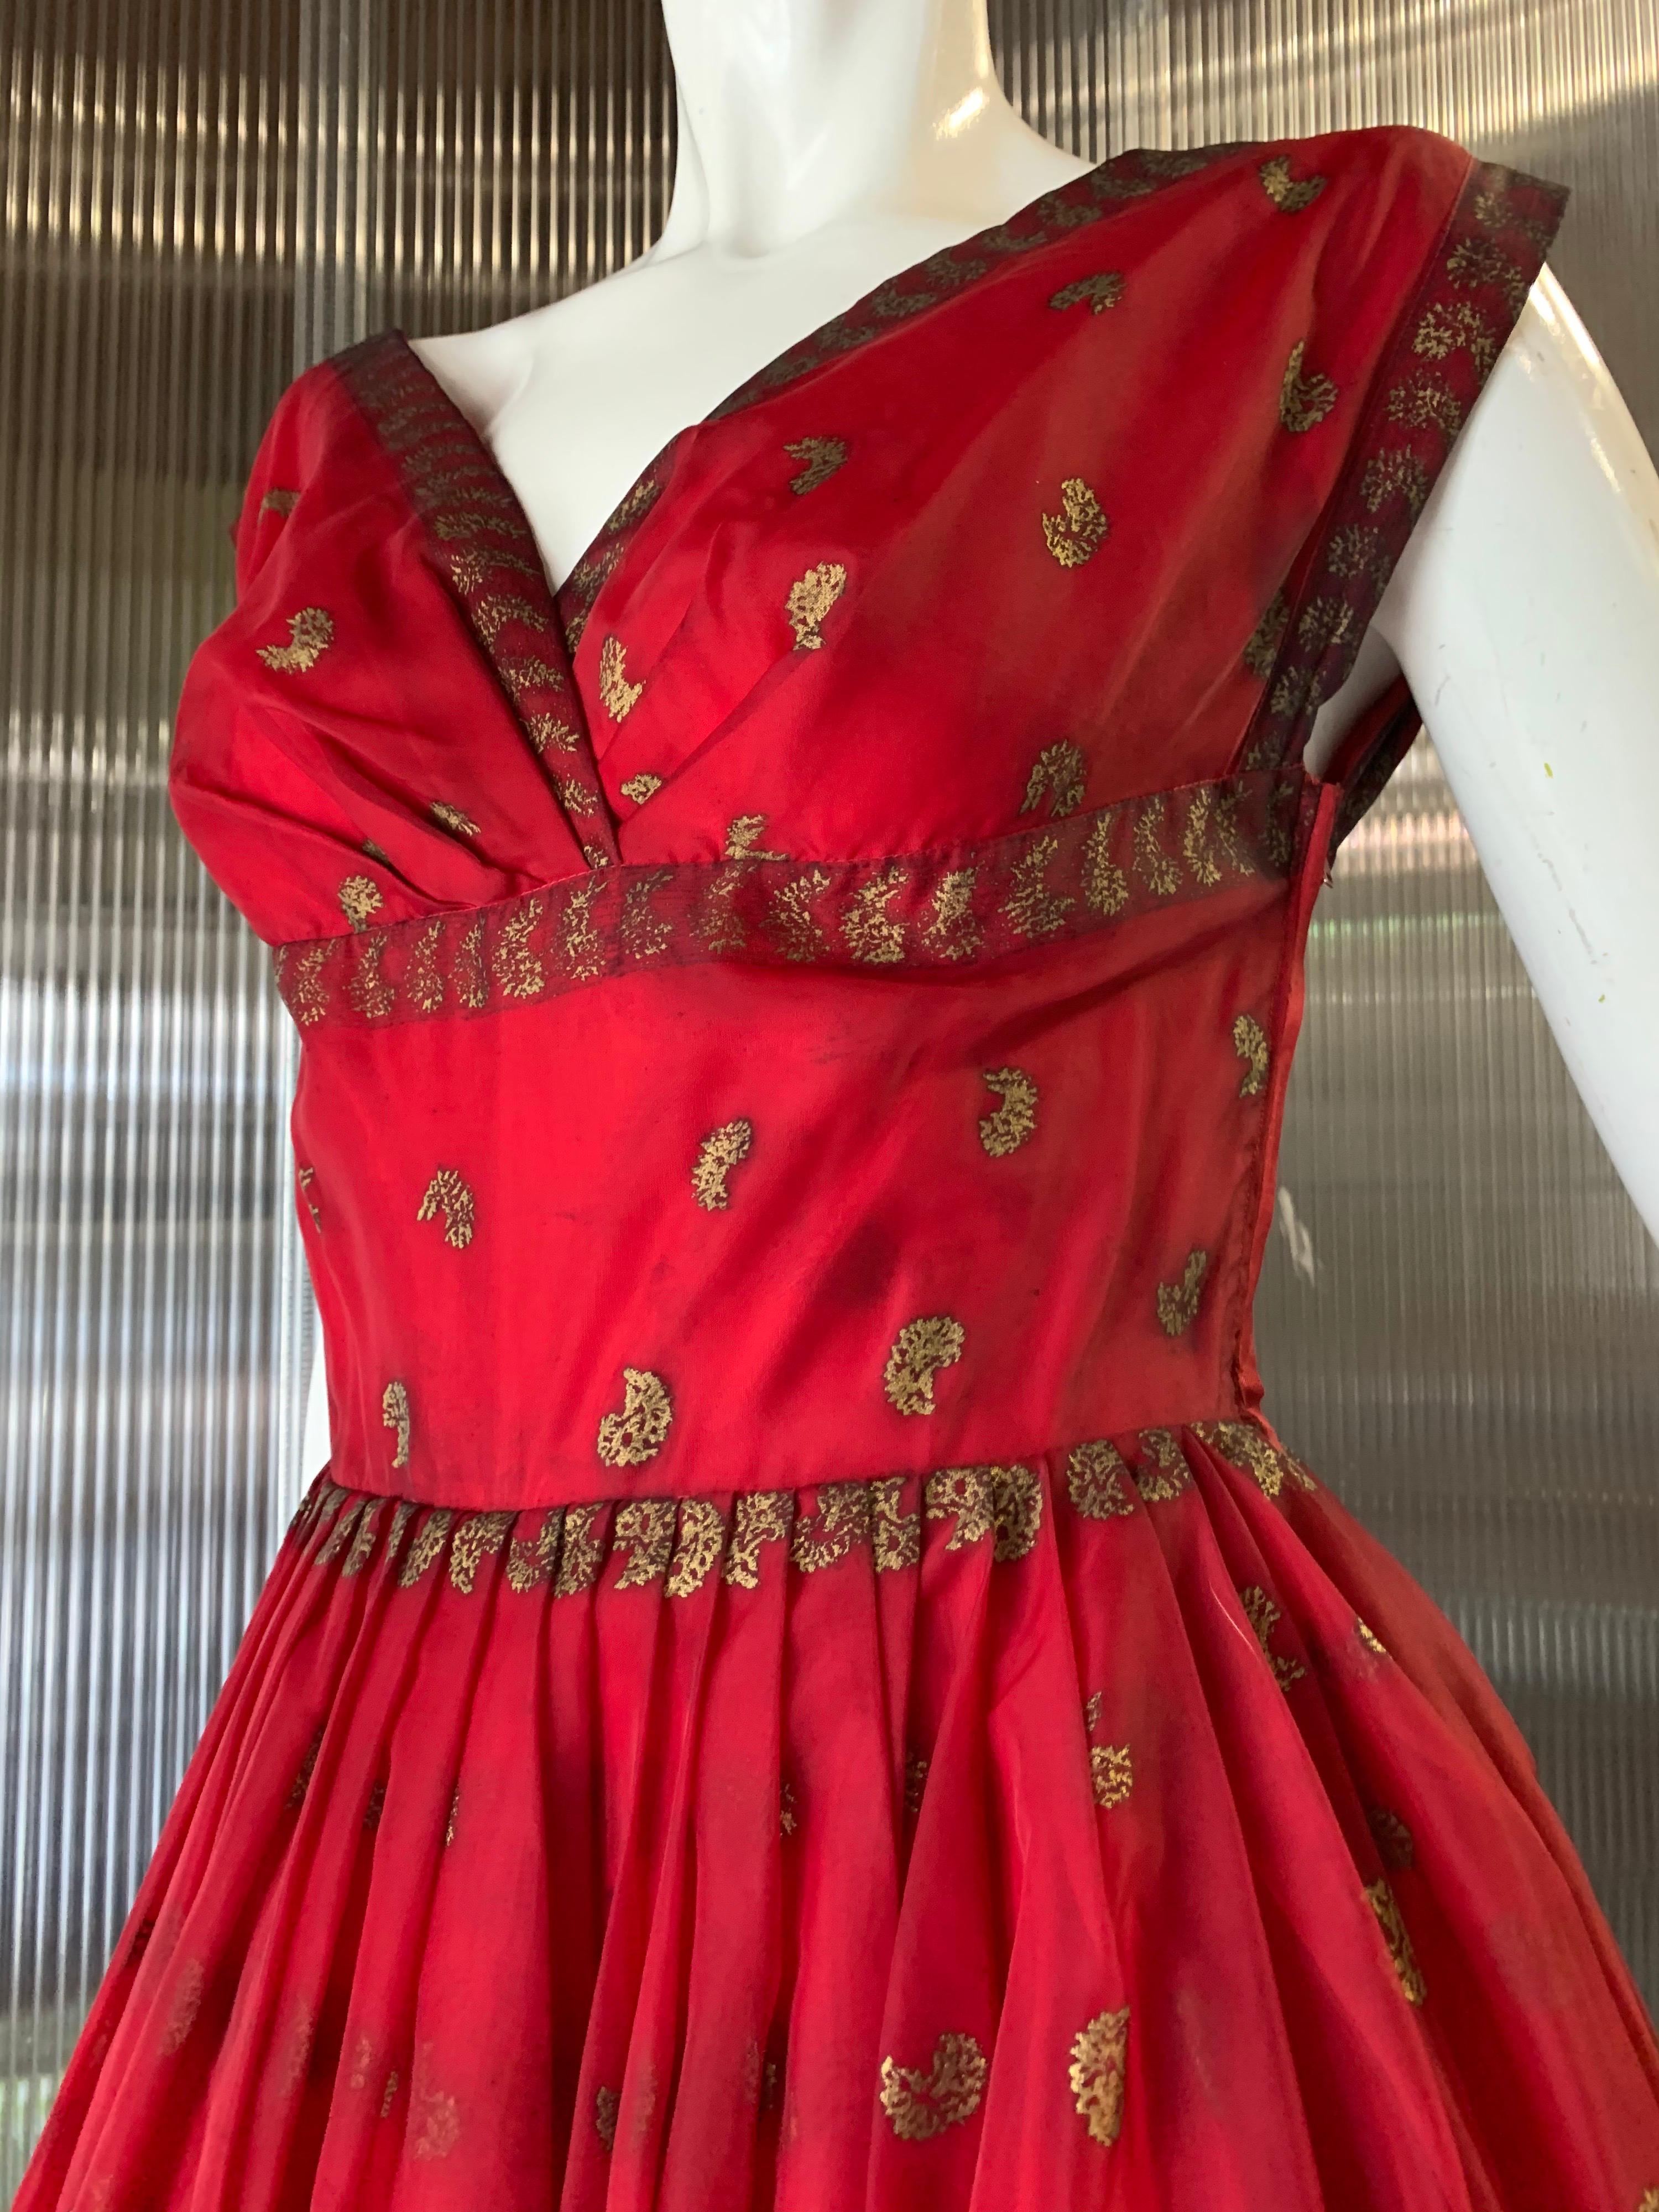 1950s Fred Perlberg Indian-Inspired dancing dress in crimson nylon organza and gold metallic paisley stamped pattern with 2 layers of lining. Fitted bodice and full pleated skirt. Side zipper. Fits a modern size 6.